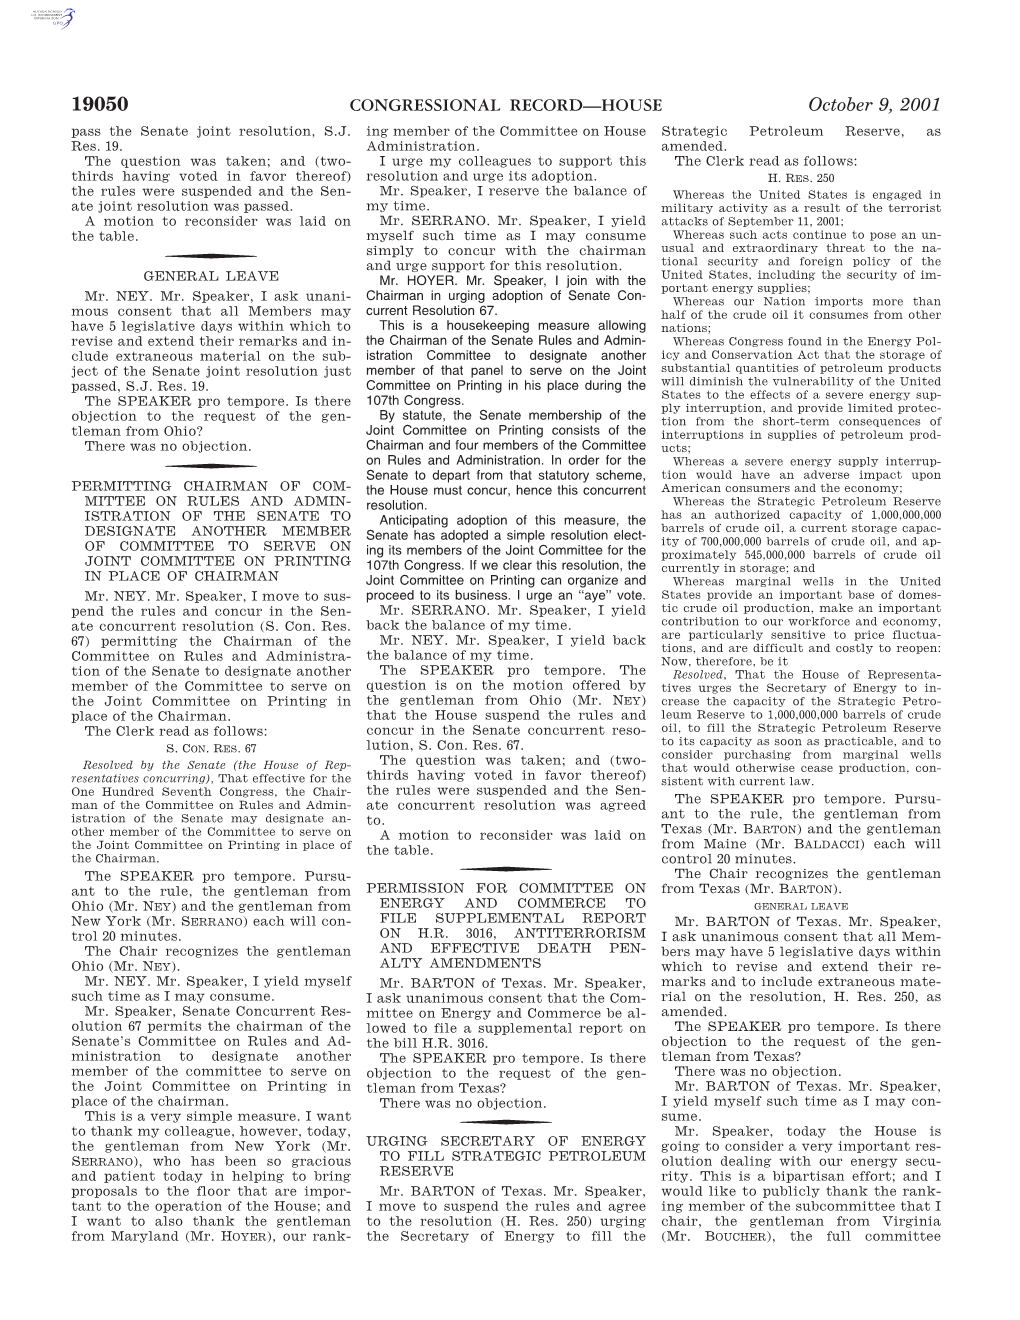 CONGRESSIONAL RECORD—HOUSE October 9, 2001 Pass the Senate Joint Resolution, S.J